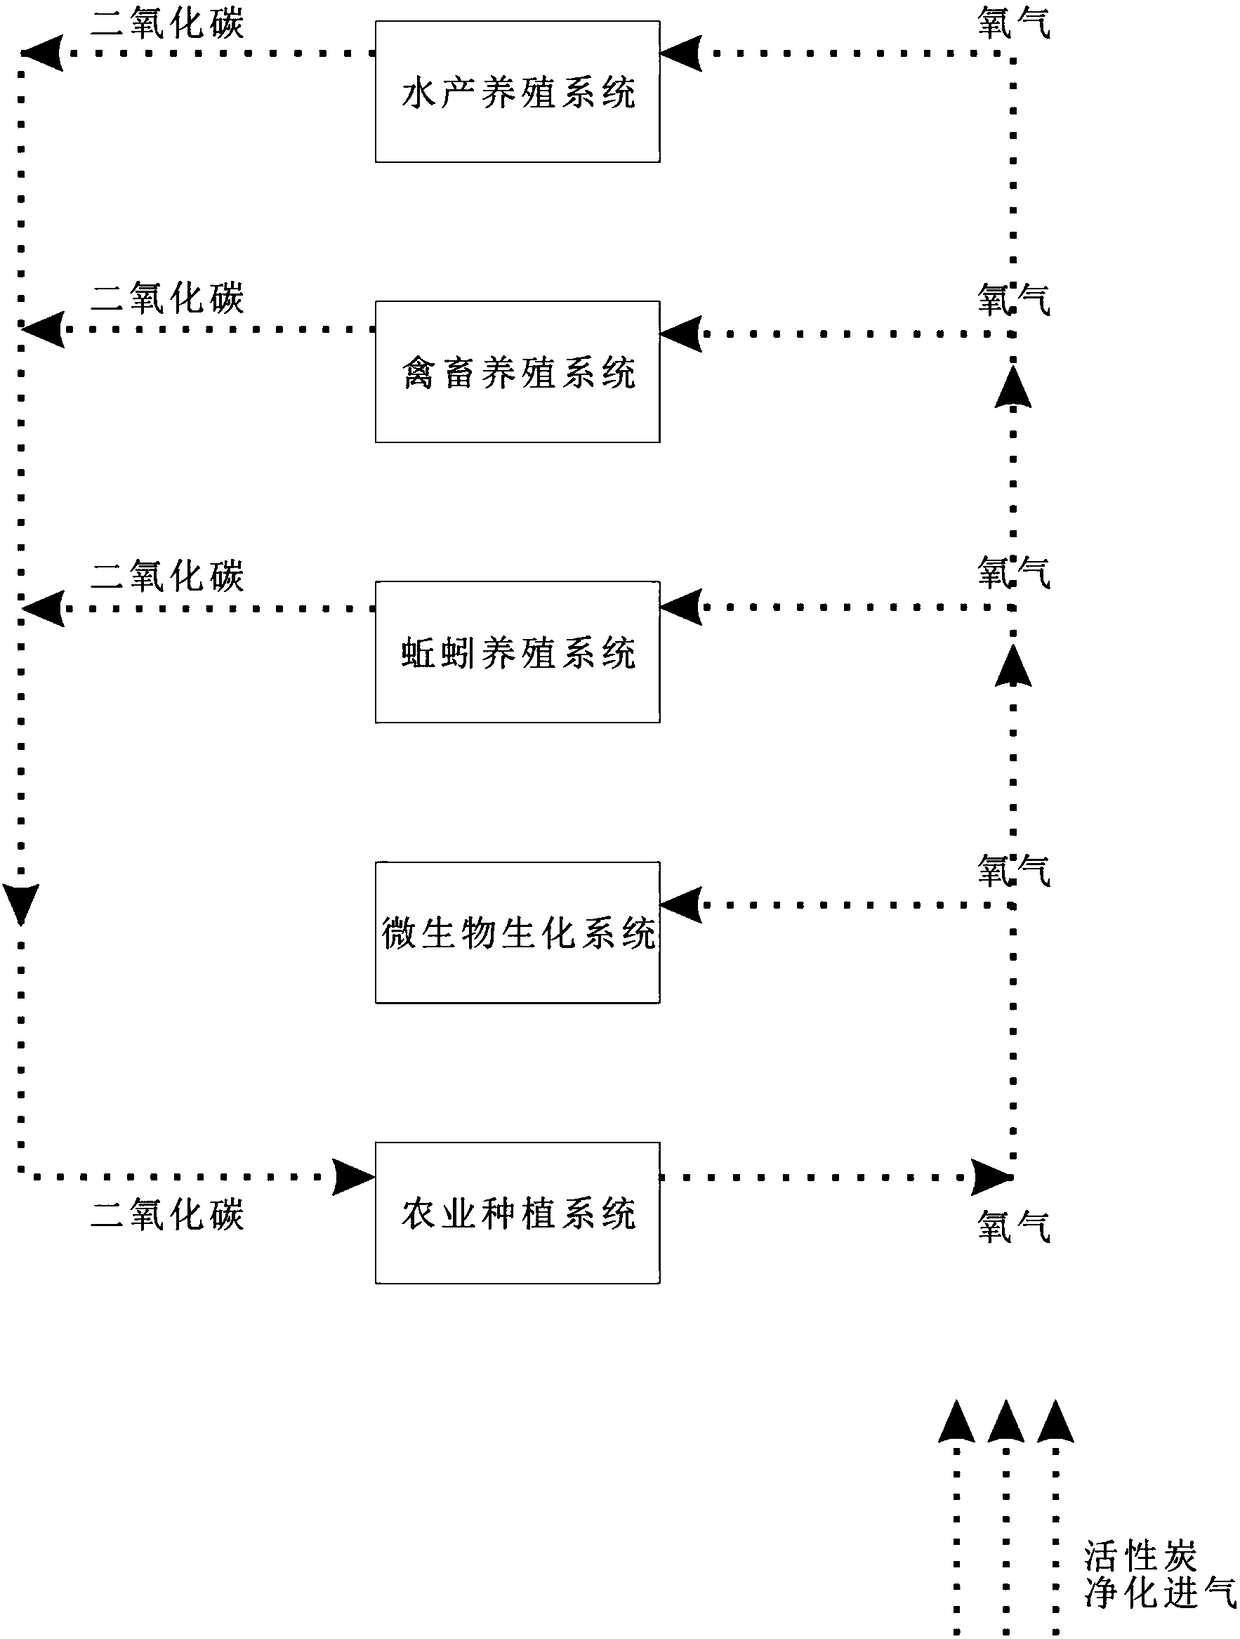 Agricultural planting and breeding ecologic resource recycling production system